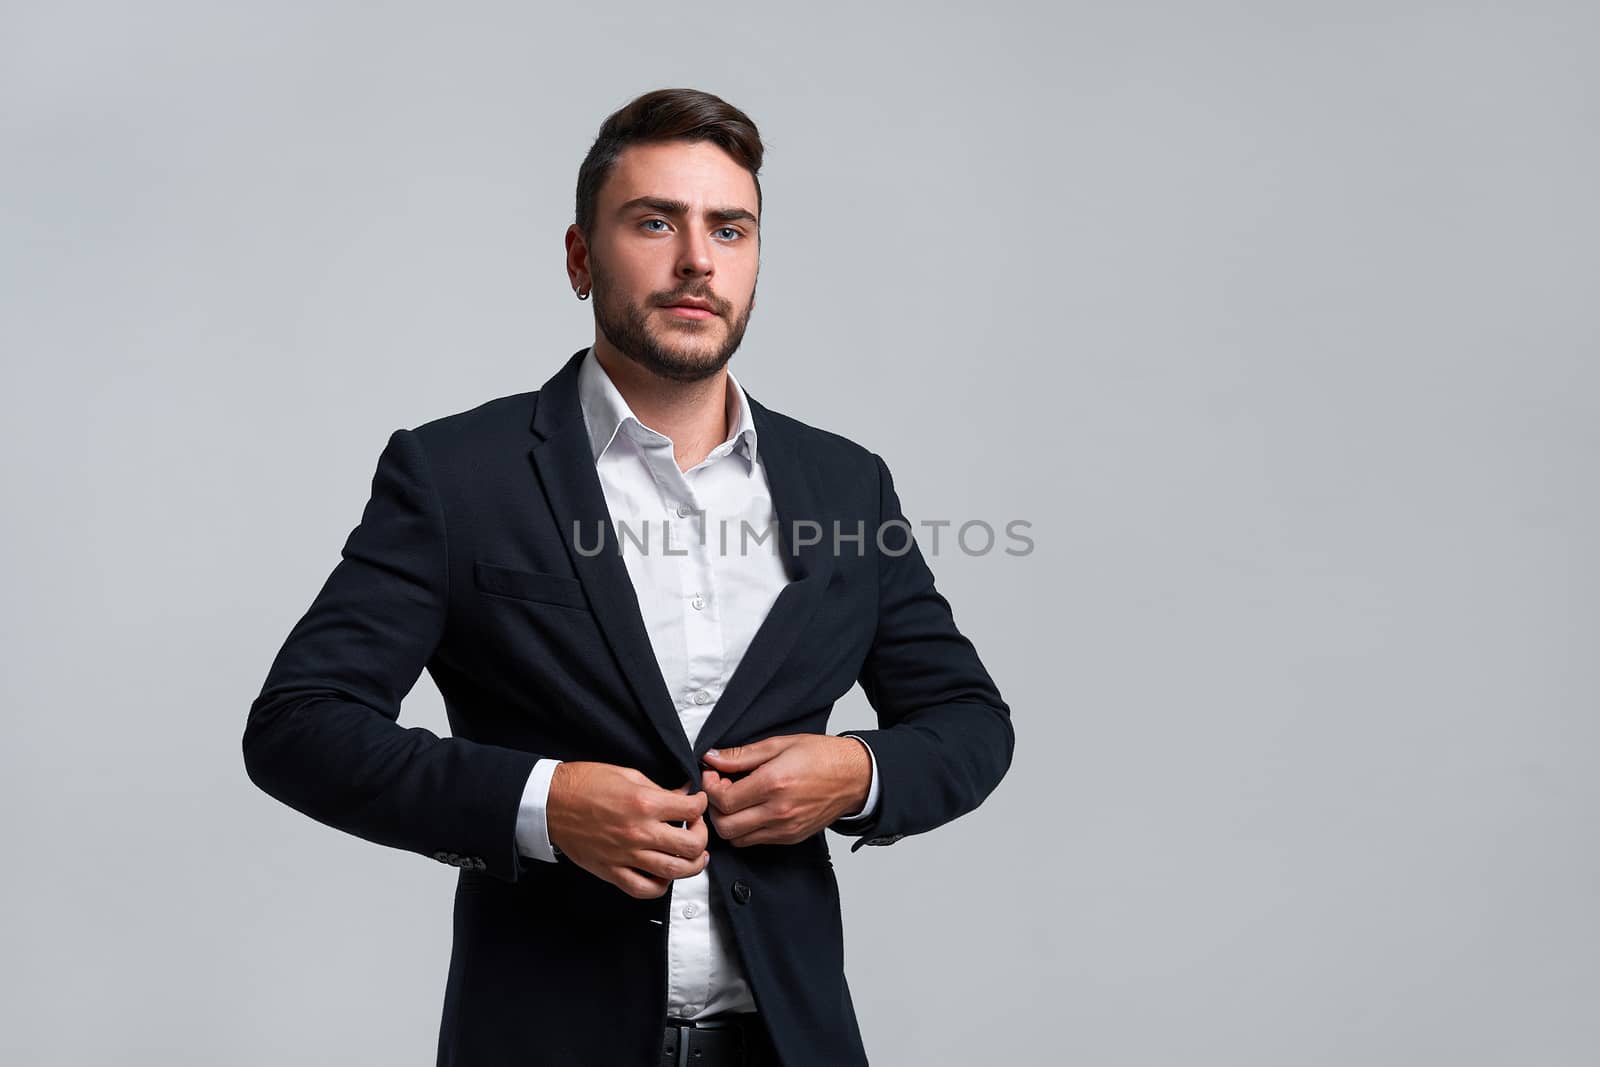 Businessman Business person. Man business suit studio gray background. Modern business person Buttons buttons on a jacket. Portrait of charming successful young entrepreneur